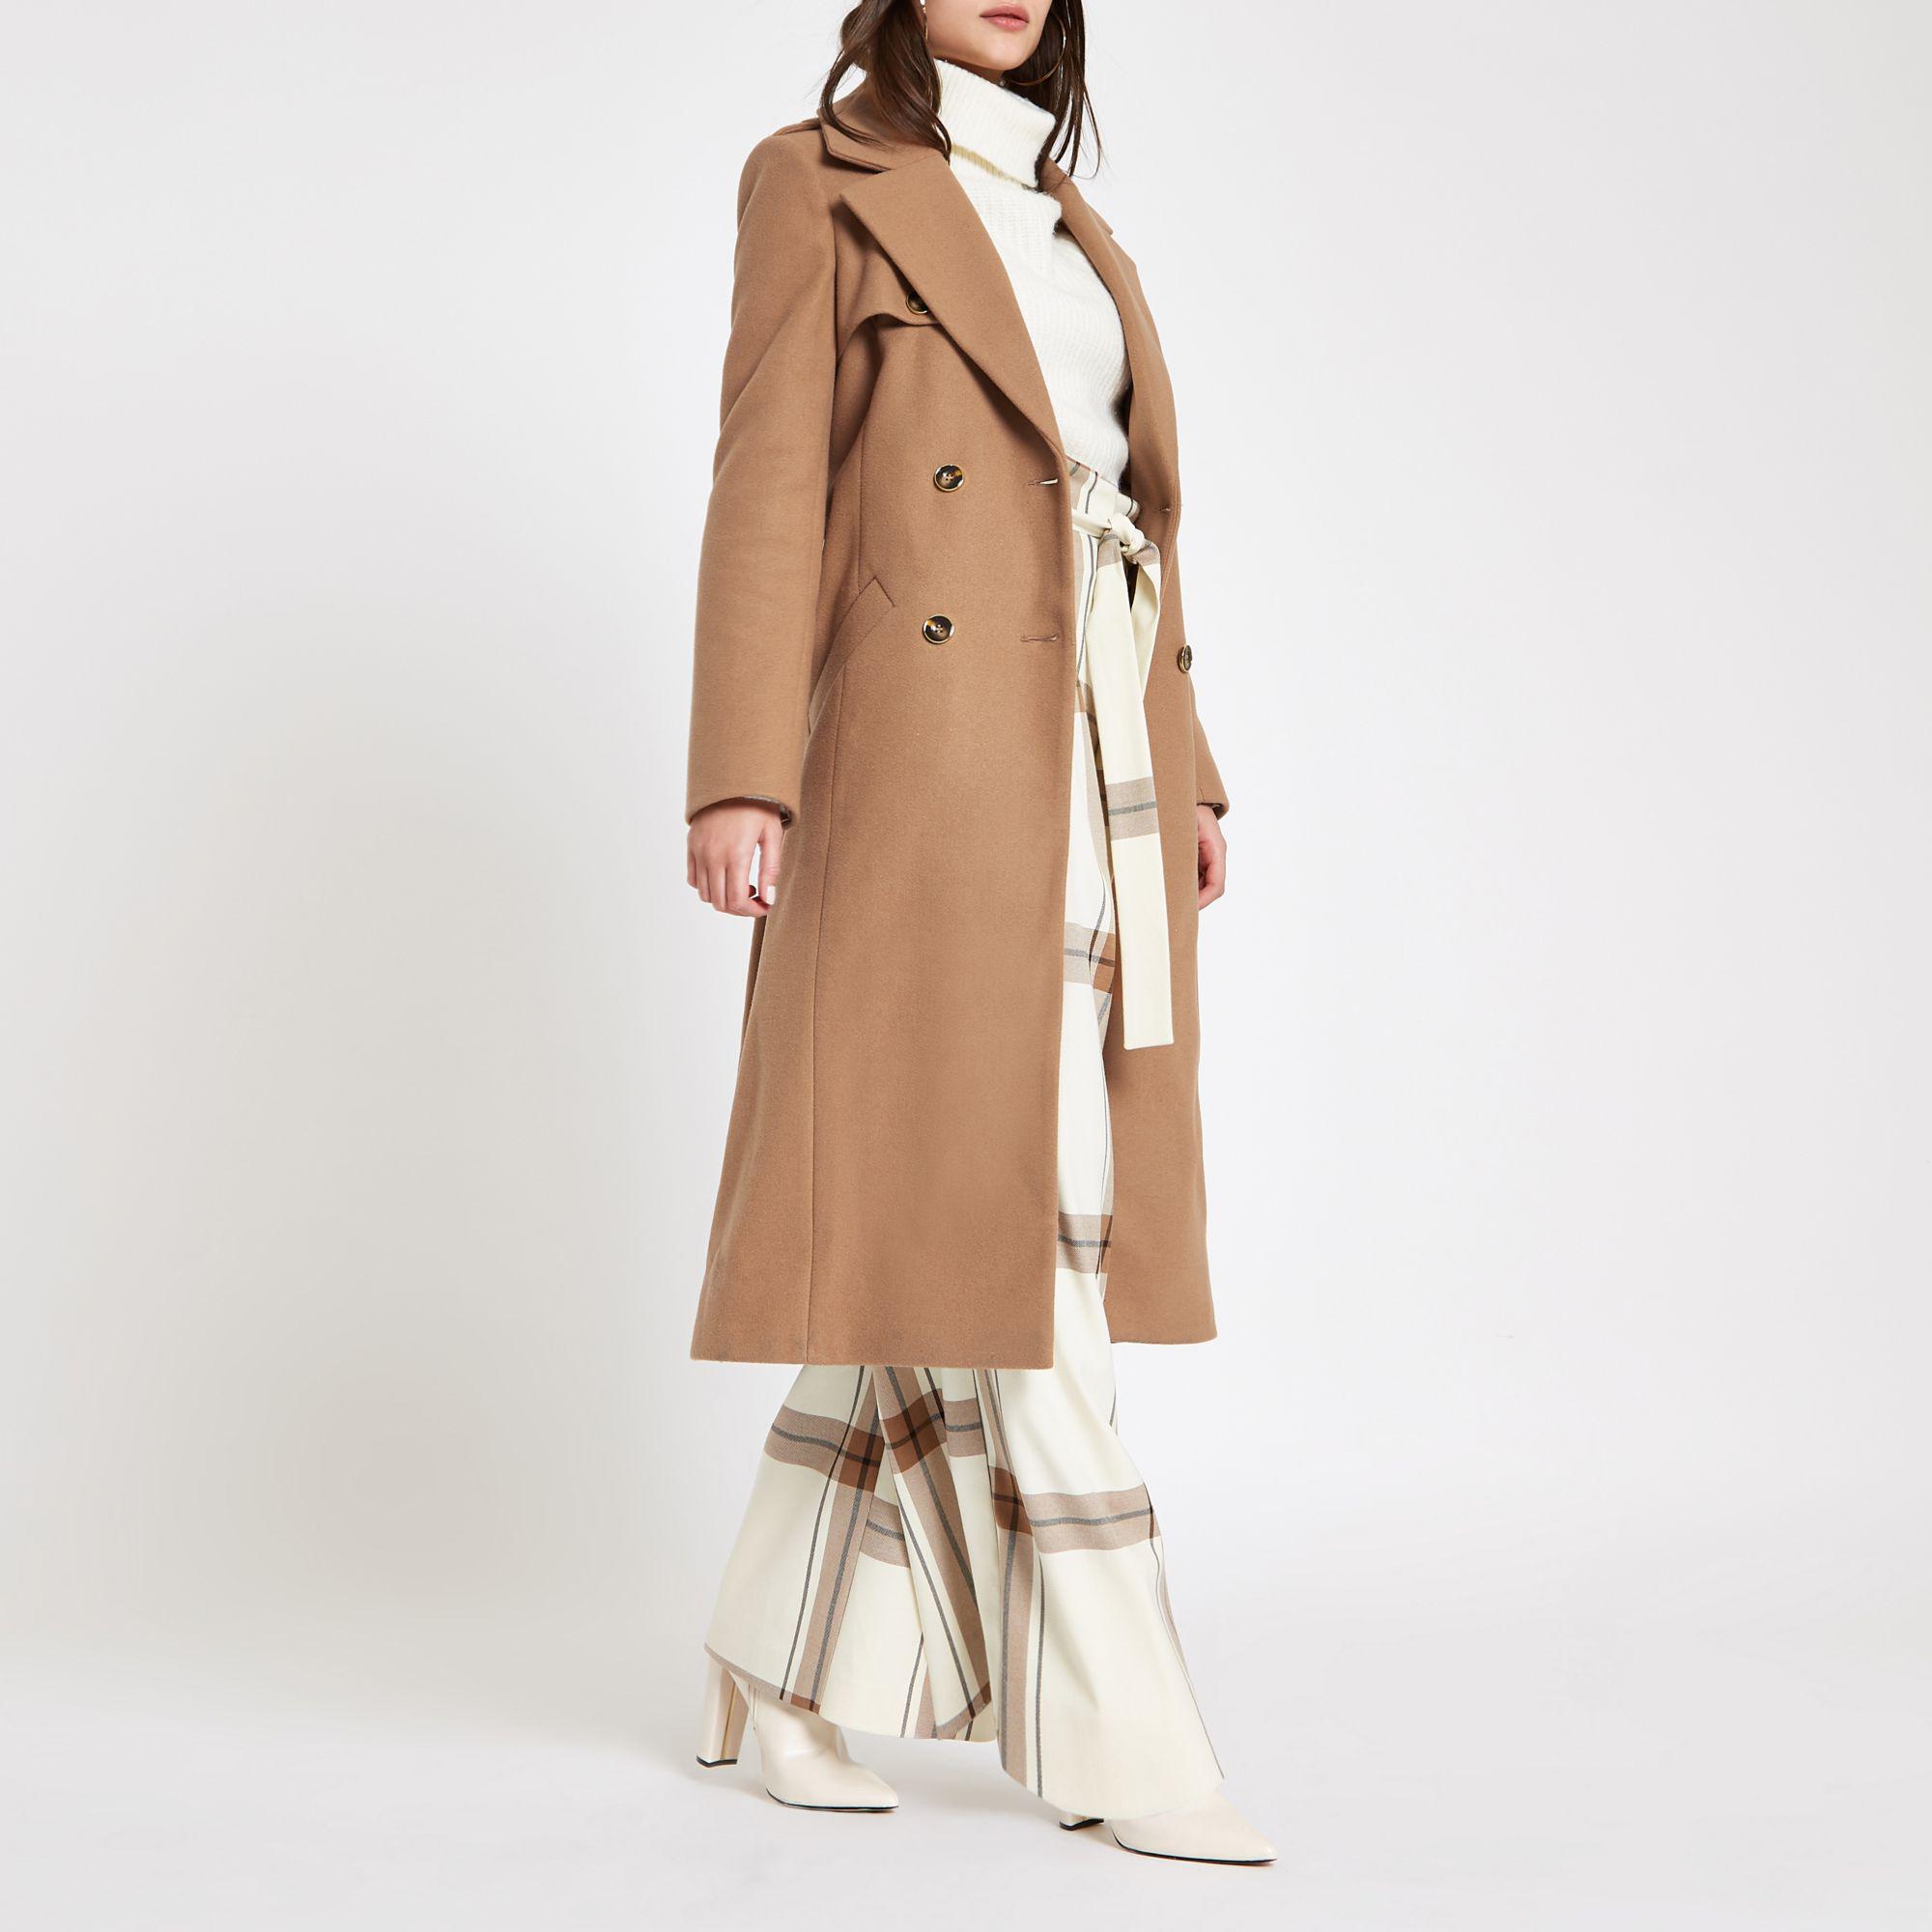 Lyst - River Island Light Belted Trench Coat in Brown